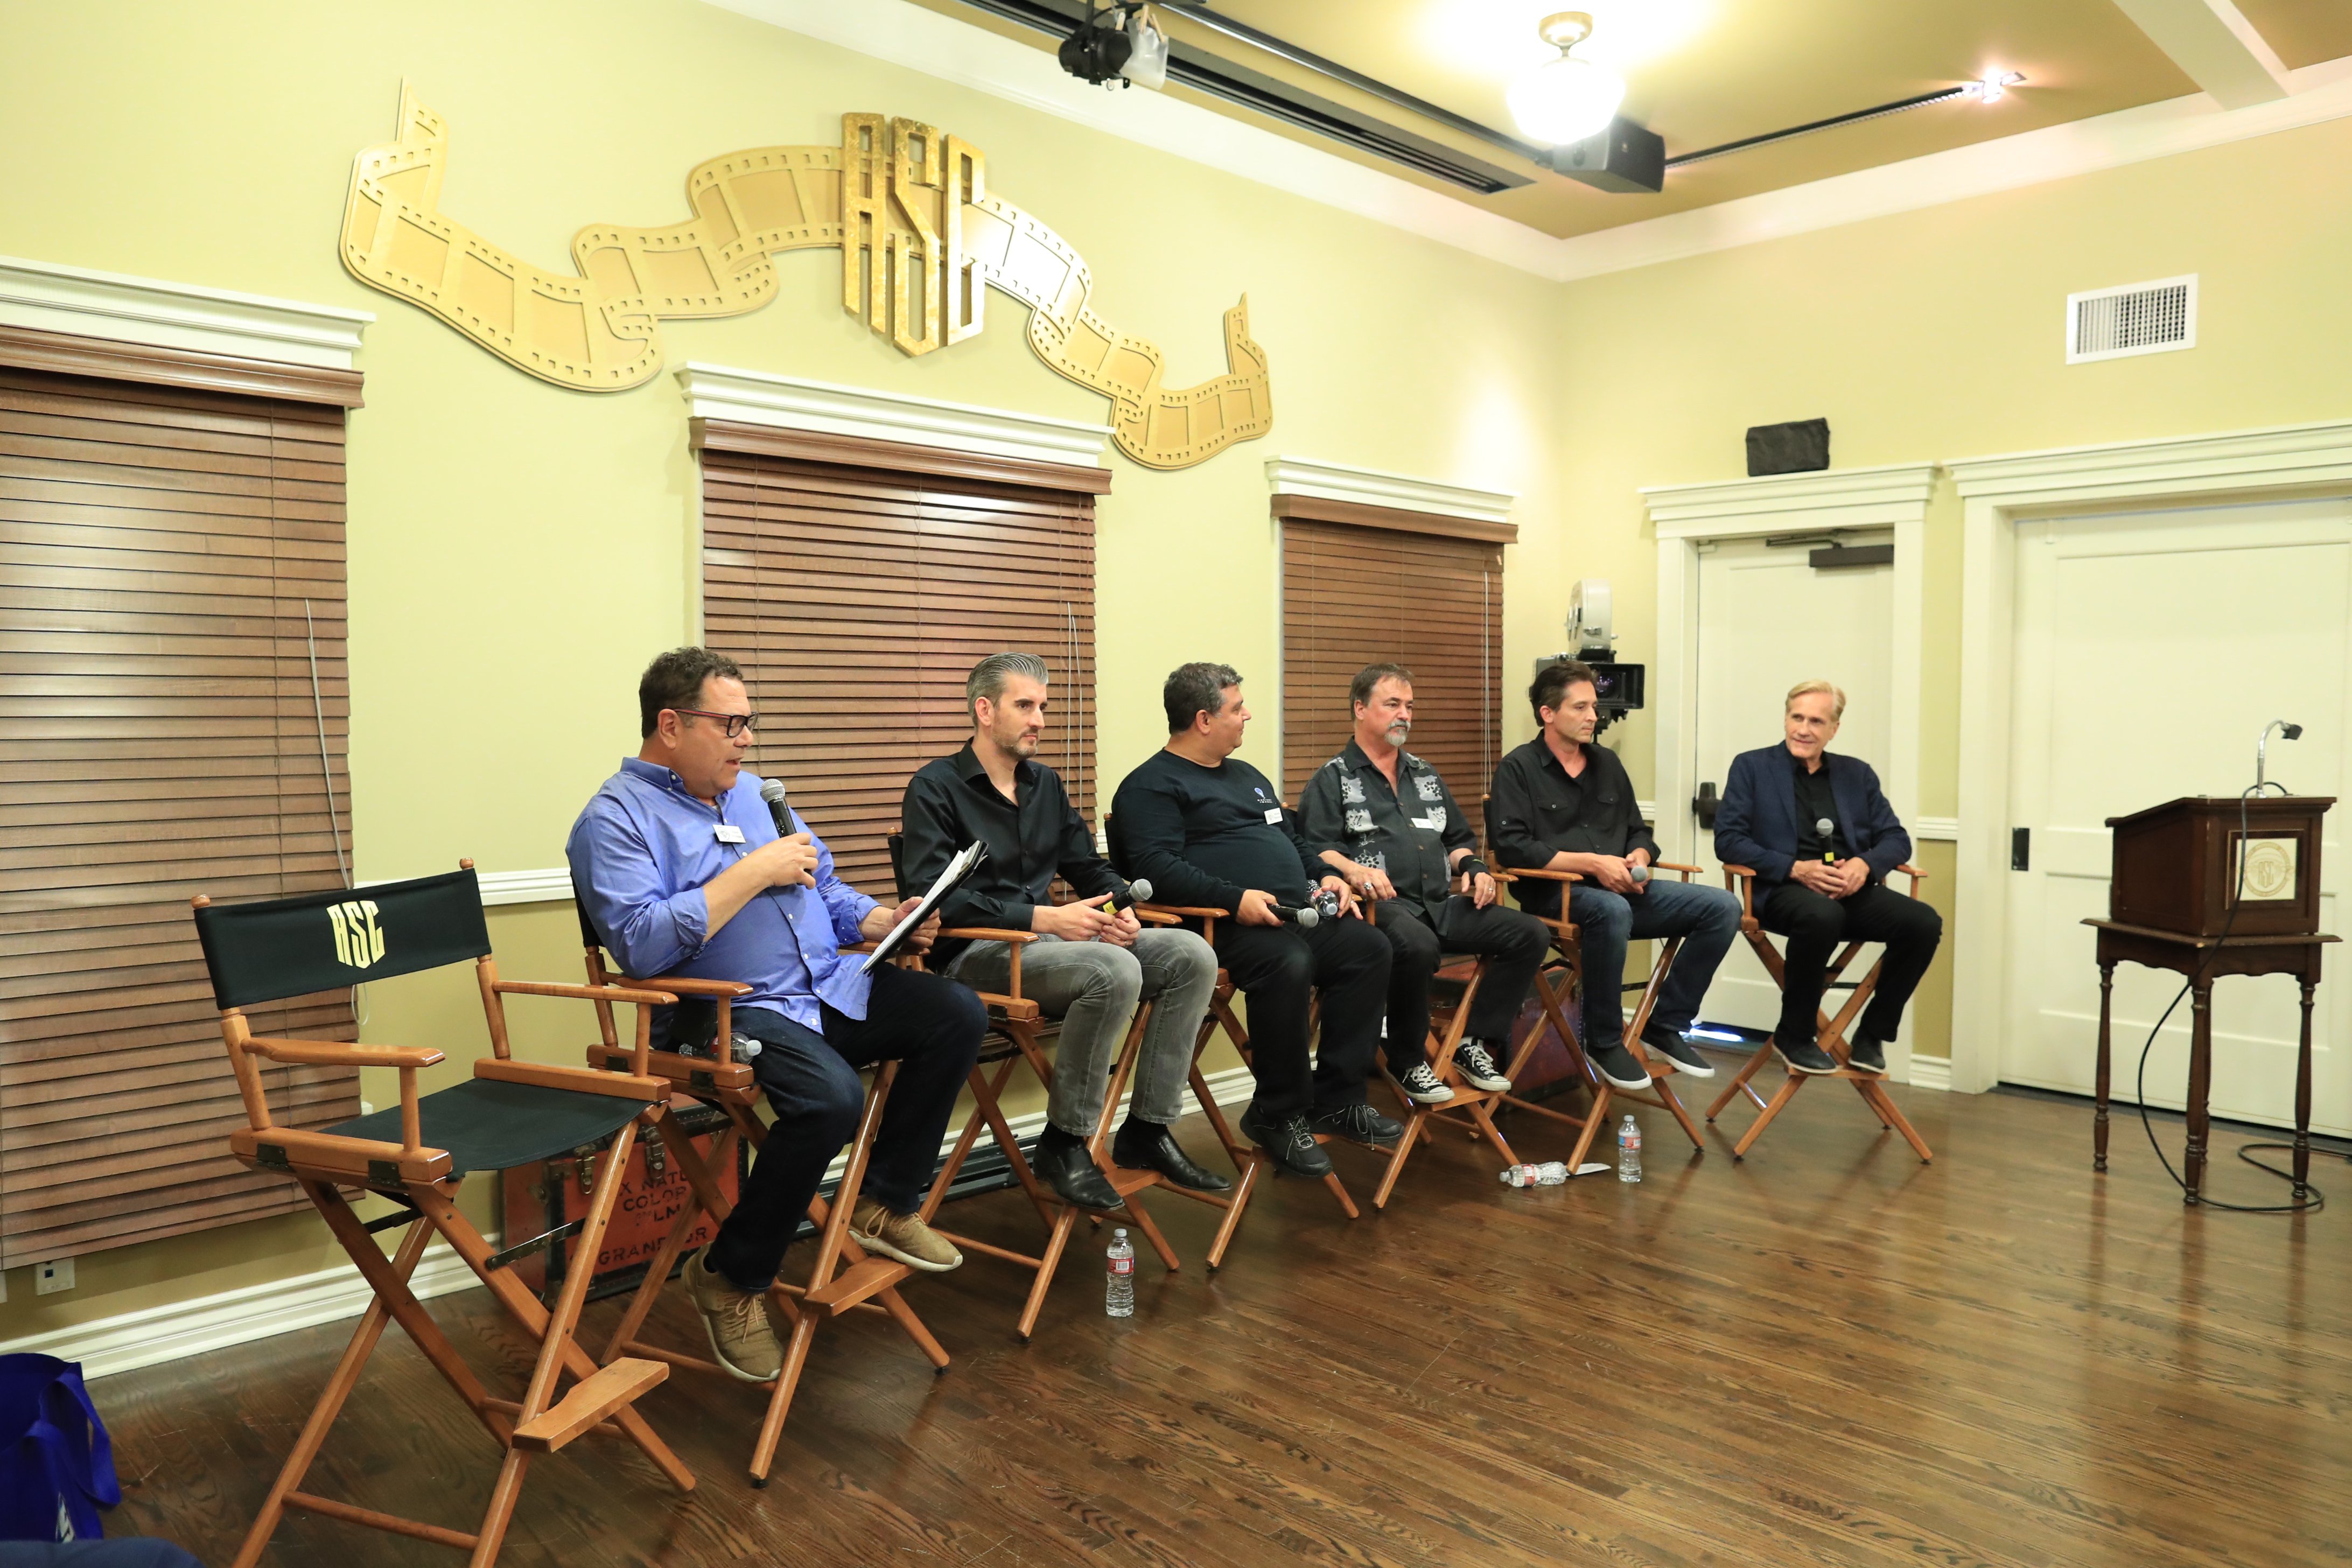 The panel discussing VR at the ASC Clubhouse was moderated by 3ality chief executive Steve Schklairand included David Stump, ASC; Virtual Reality Company chief executive Chris Edwards; director Randal Kleiser; Radiant Images co-founder Michael Mansouri; Sony Pictures Entertainment vice president of production technology Scott Barbour; and Virtual Reality Company founder/vfx artist Rob Stromberg. Photo by James Neihouse, ASC